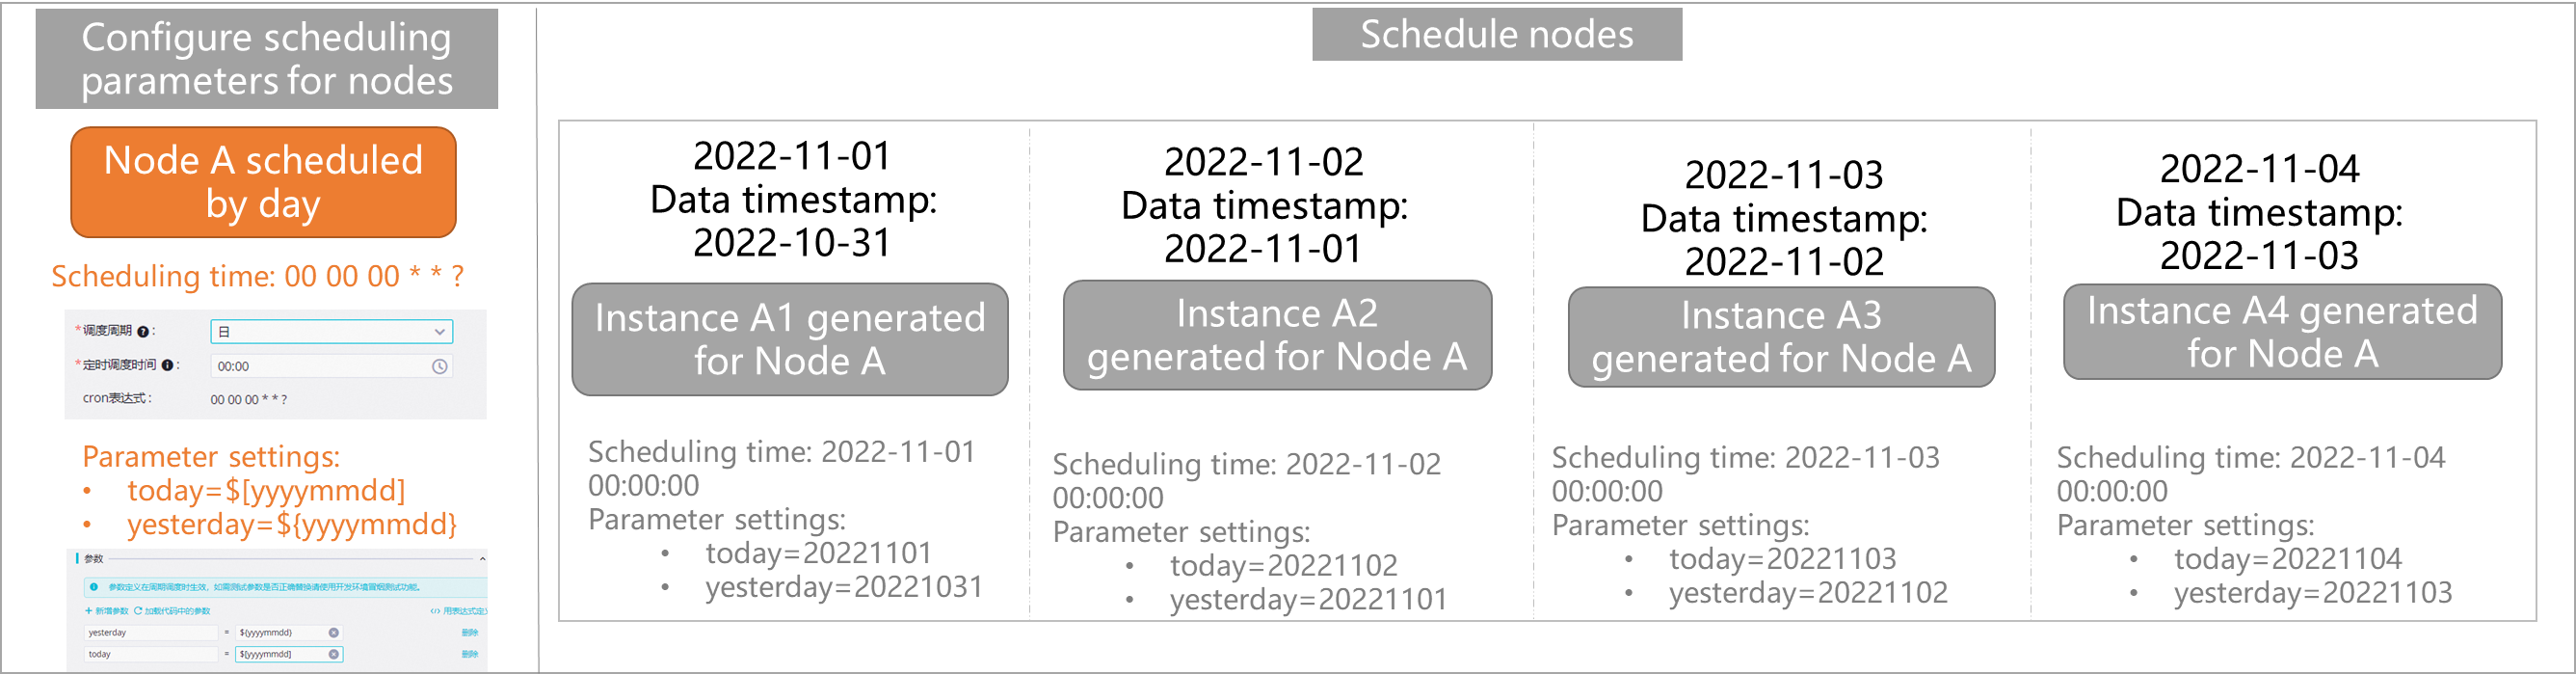 Relationships between scheduling parameters and the data timestamp and scheduling time of a node